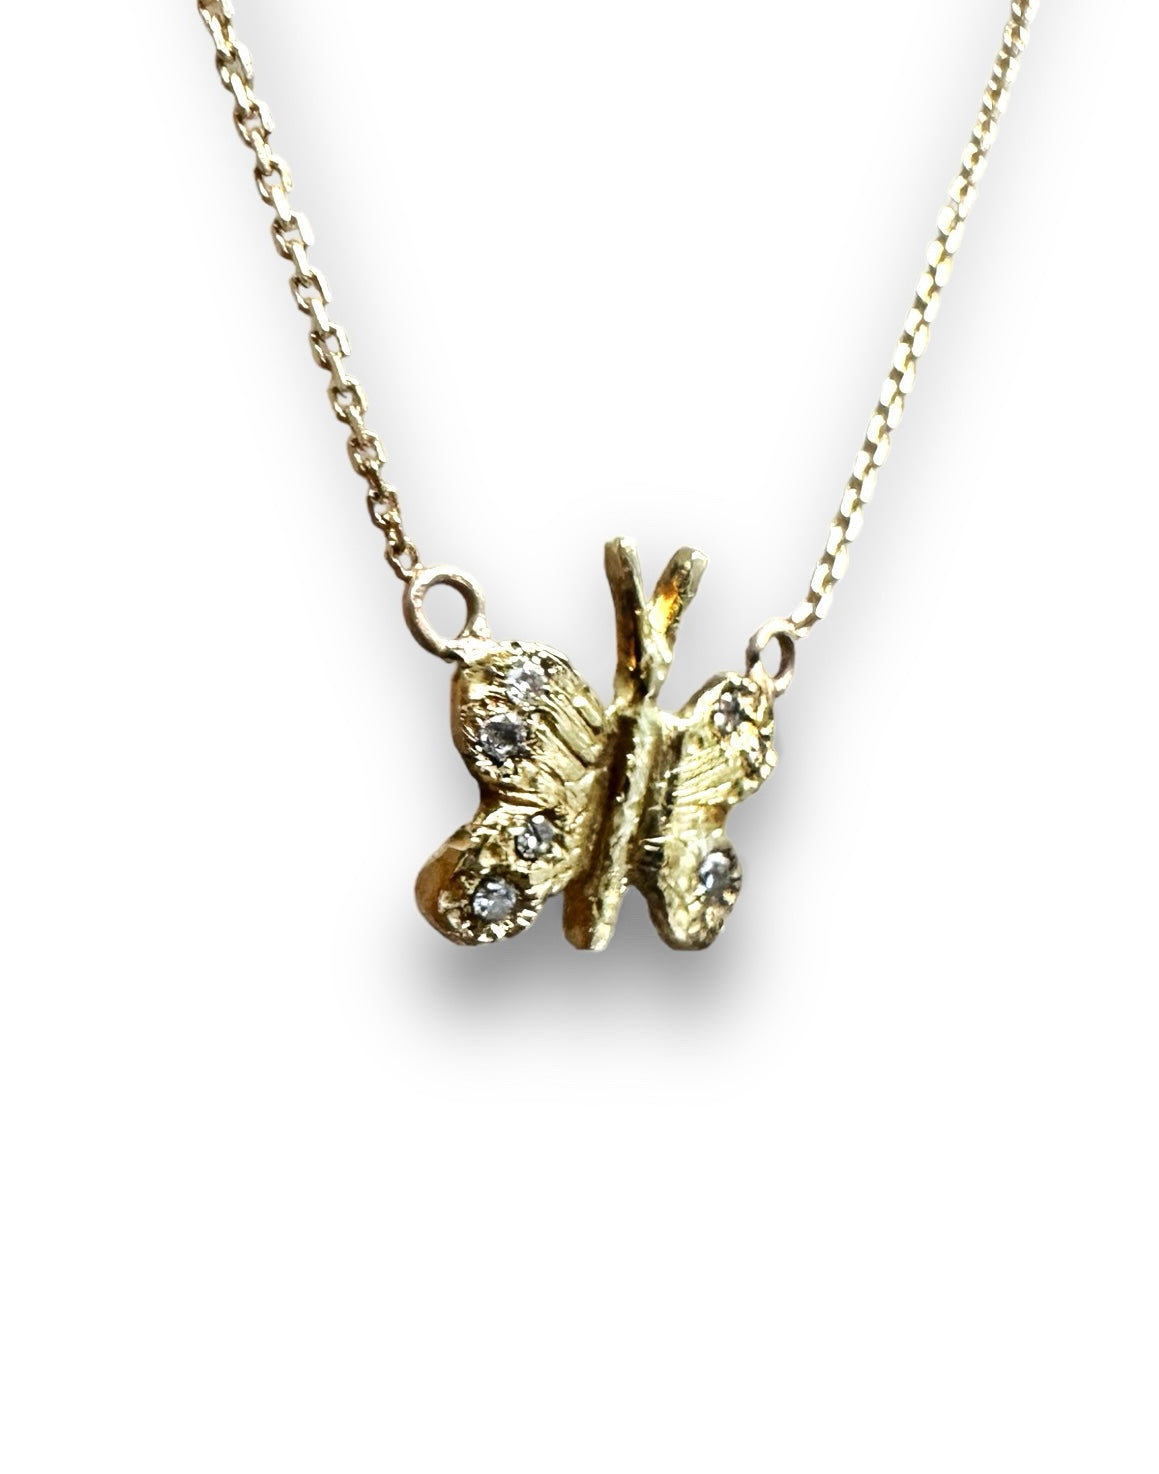 Butterfly Necklace with diamonds 18K gold One of a kind